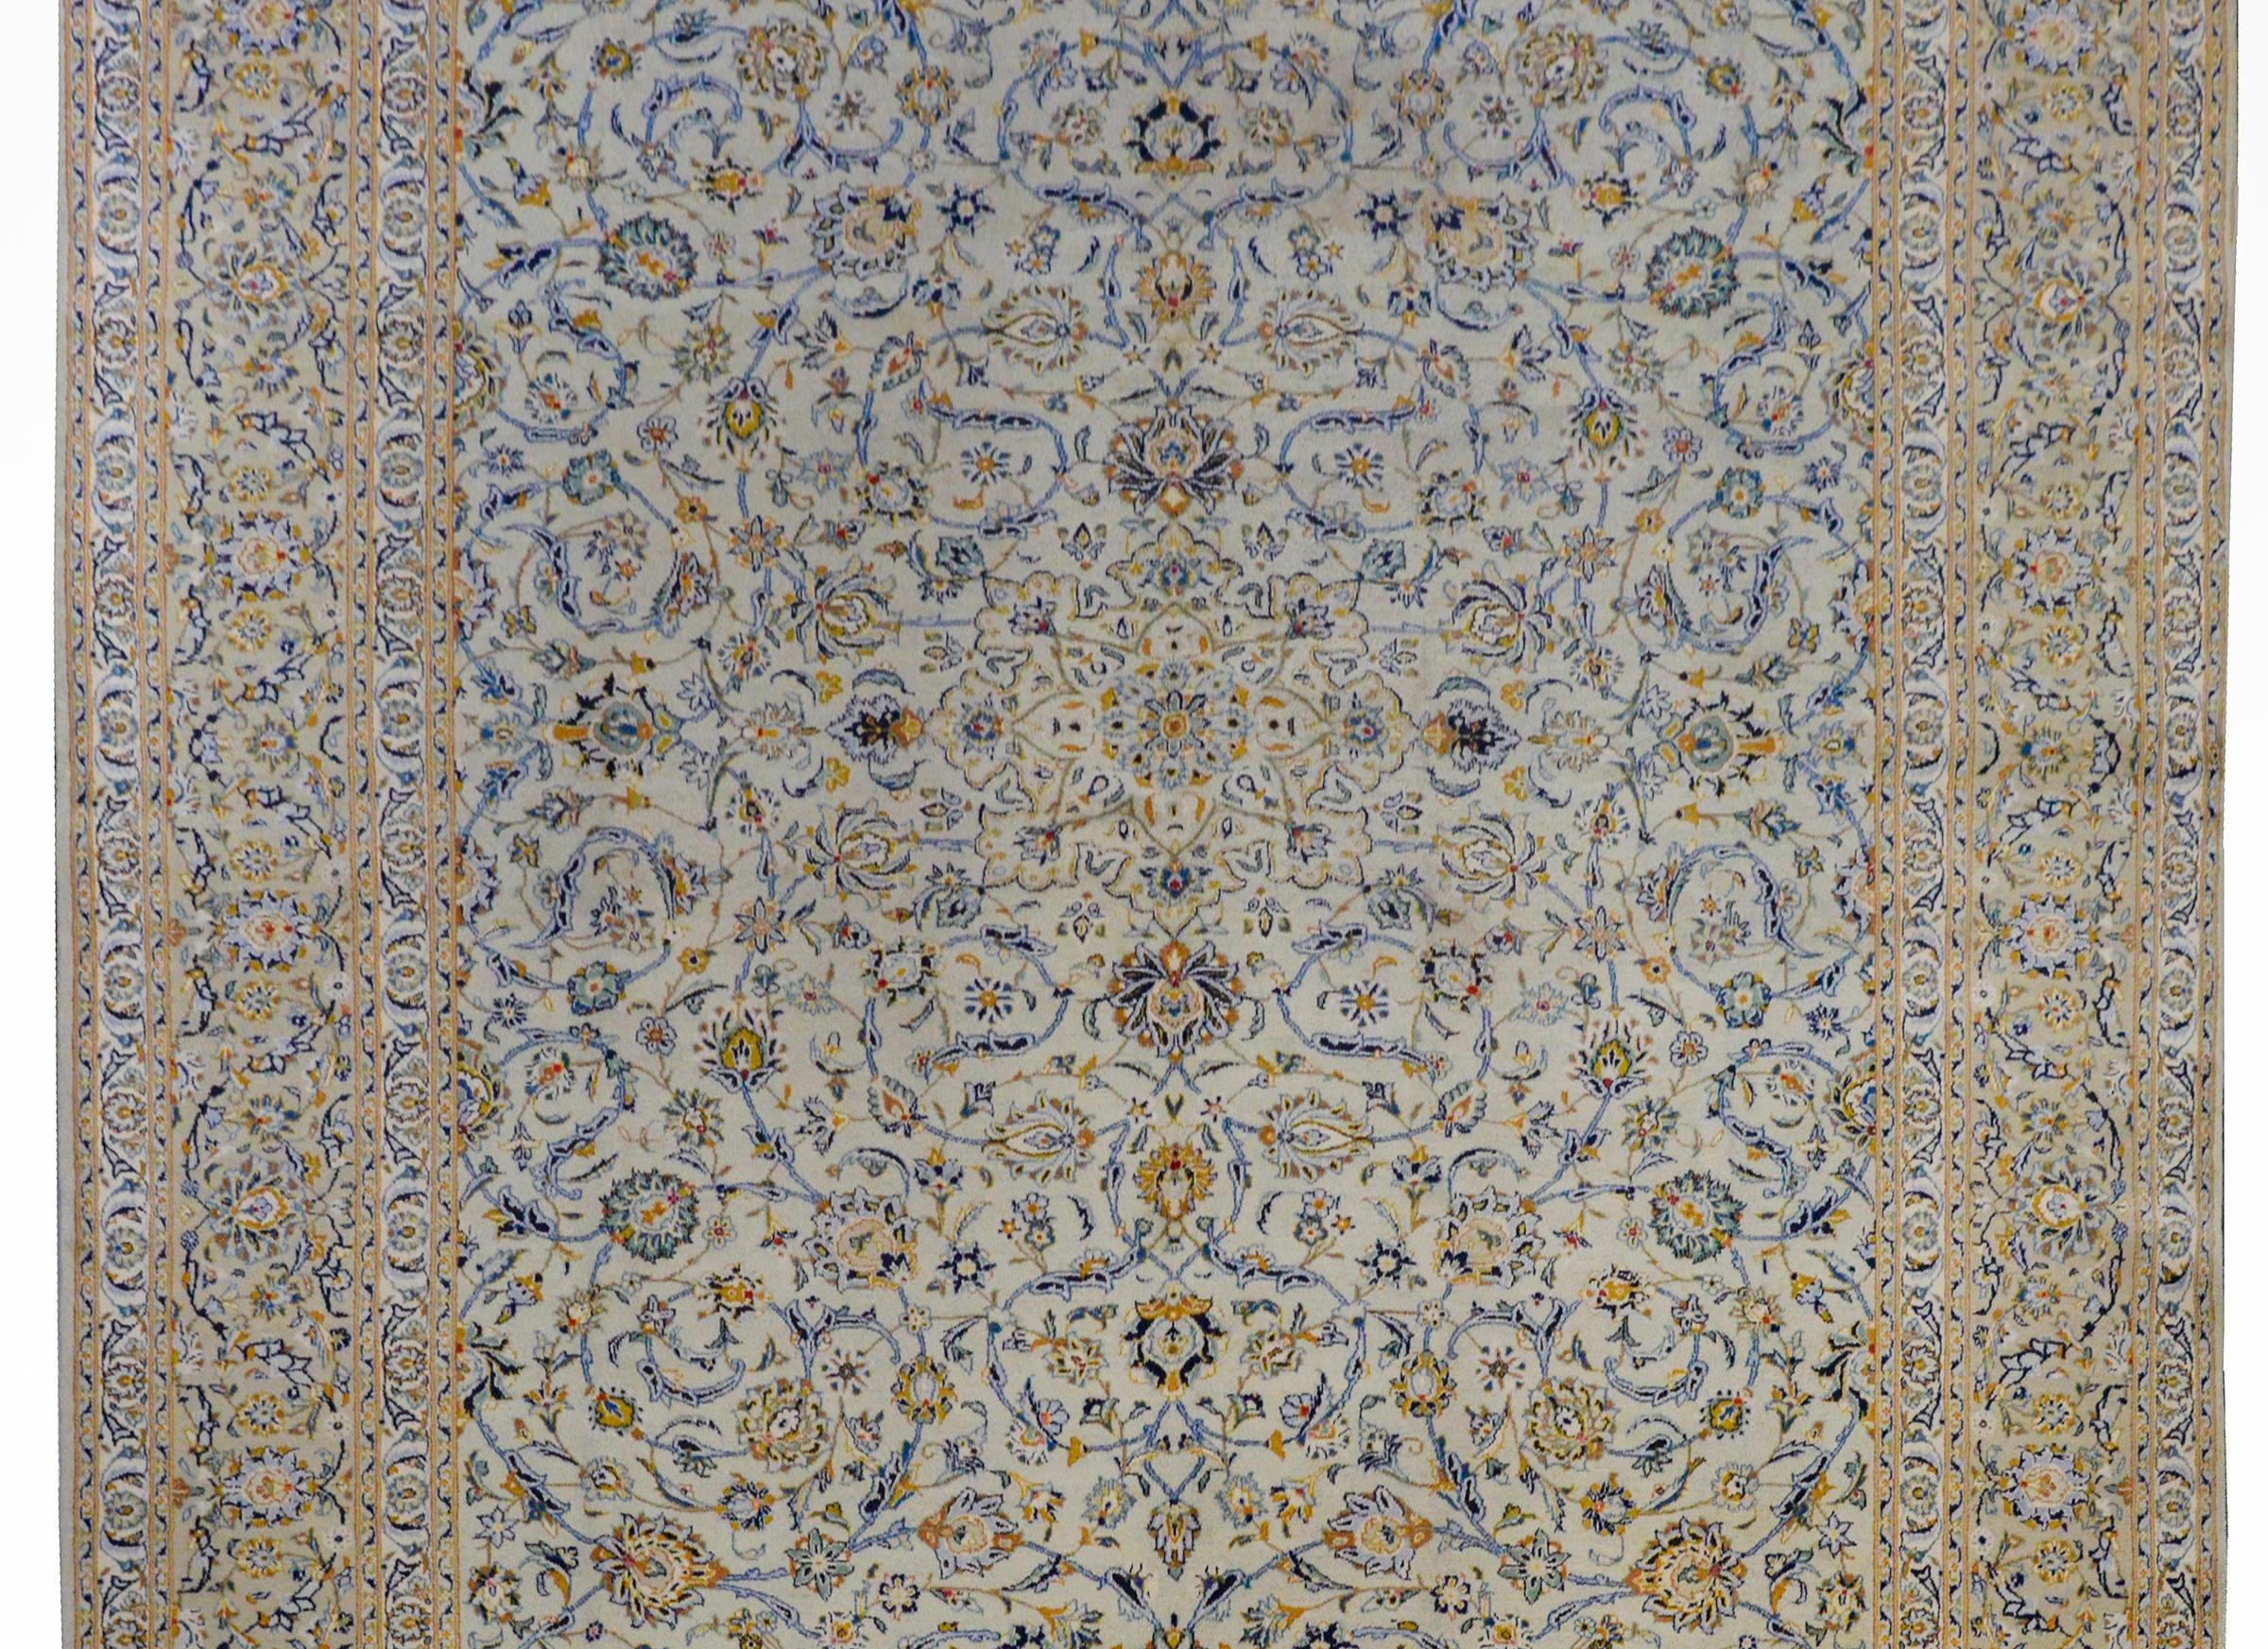 An outstanding mid-20th century Persian Kashan rug with an all-over floral and scrolling vine trellis pattern woven in light and dark indigo, green, gold, orange, and red vegetable dyed wool on a cream colored ground. The border is exceptionally